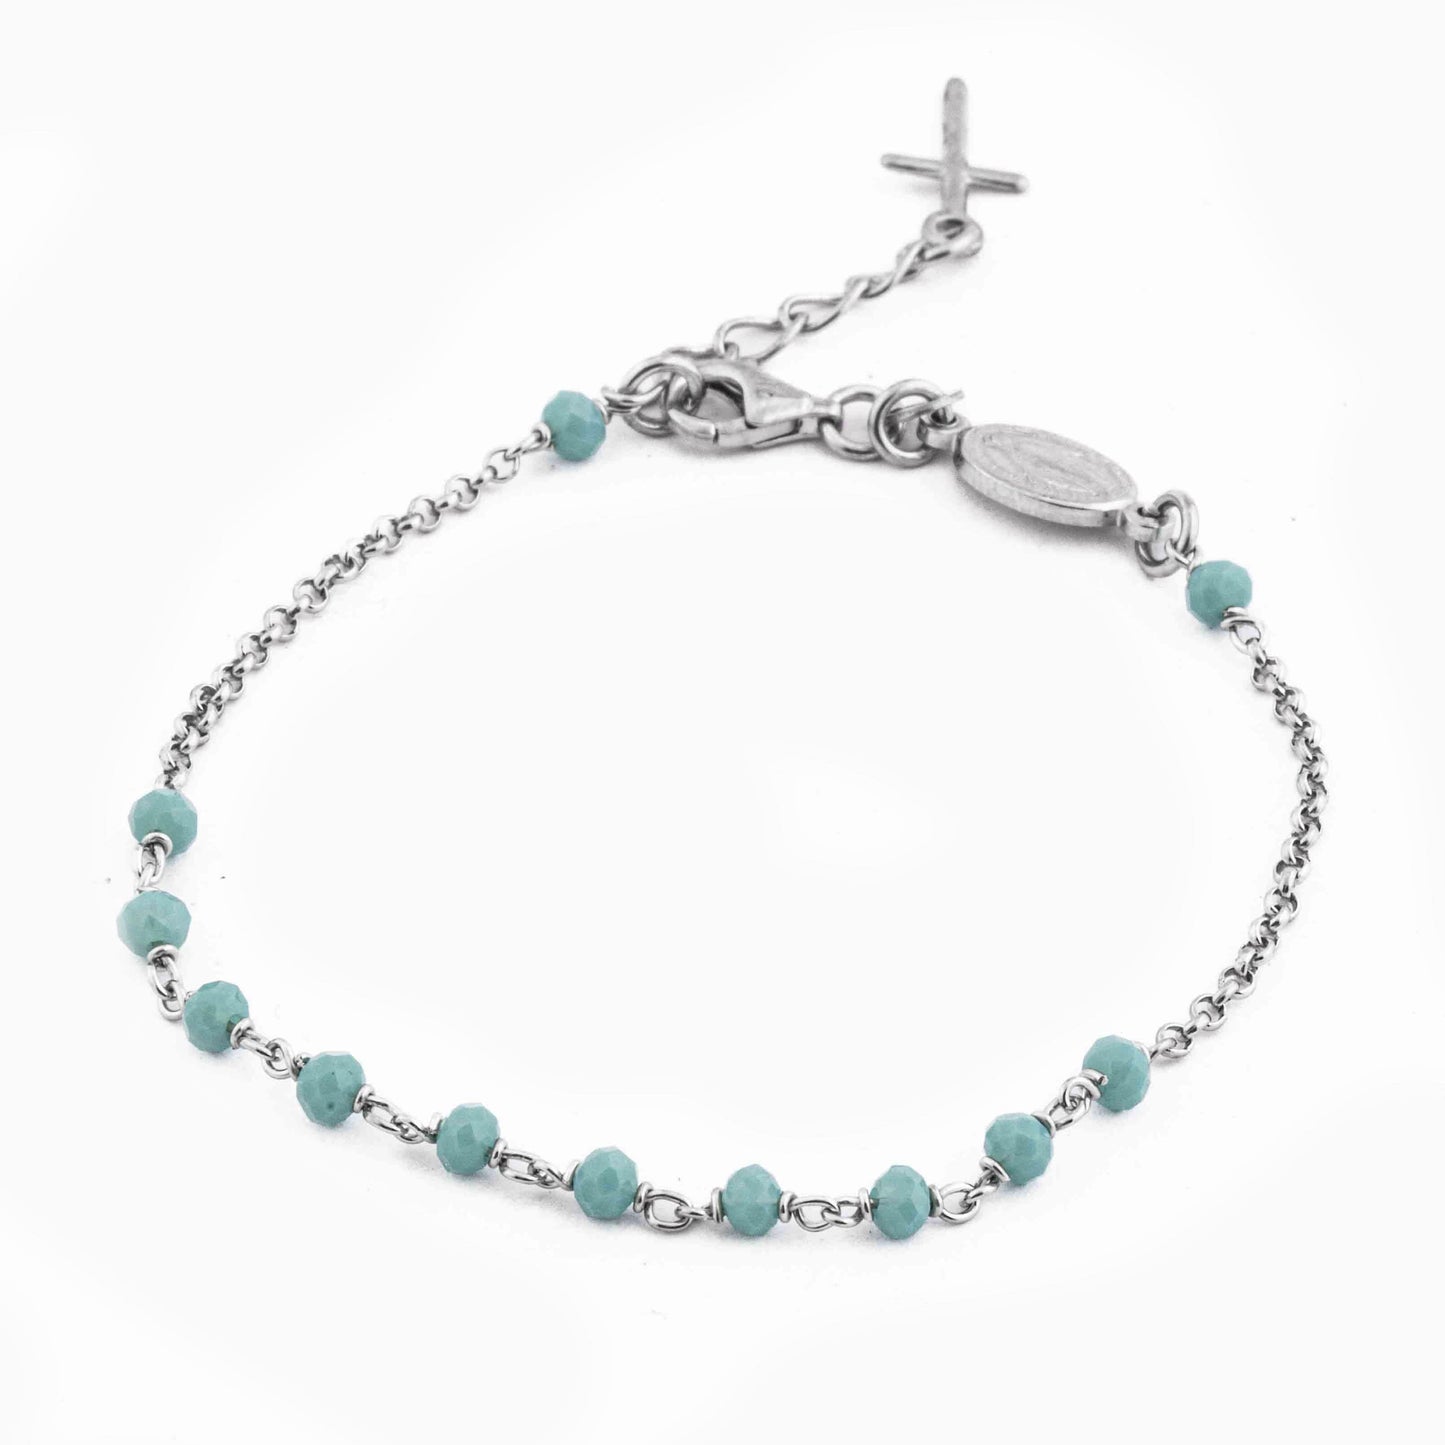 MONDO CATTOLICO Prayer Beads Rhodium e Turquoise Beads / Cm 17.5 (6.9 in) STERLING SILVER ROSARY BRACELET WITH MIRACULOUS MEDAL AND CROSS FACETED BEADS